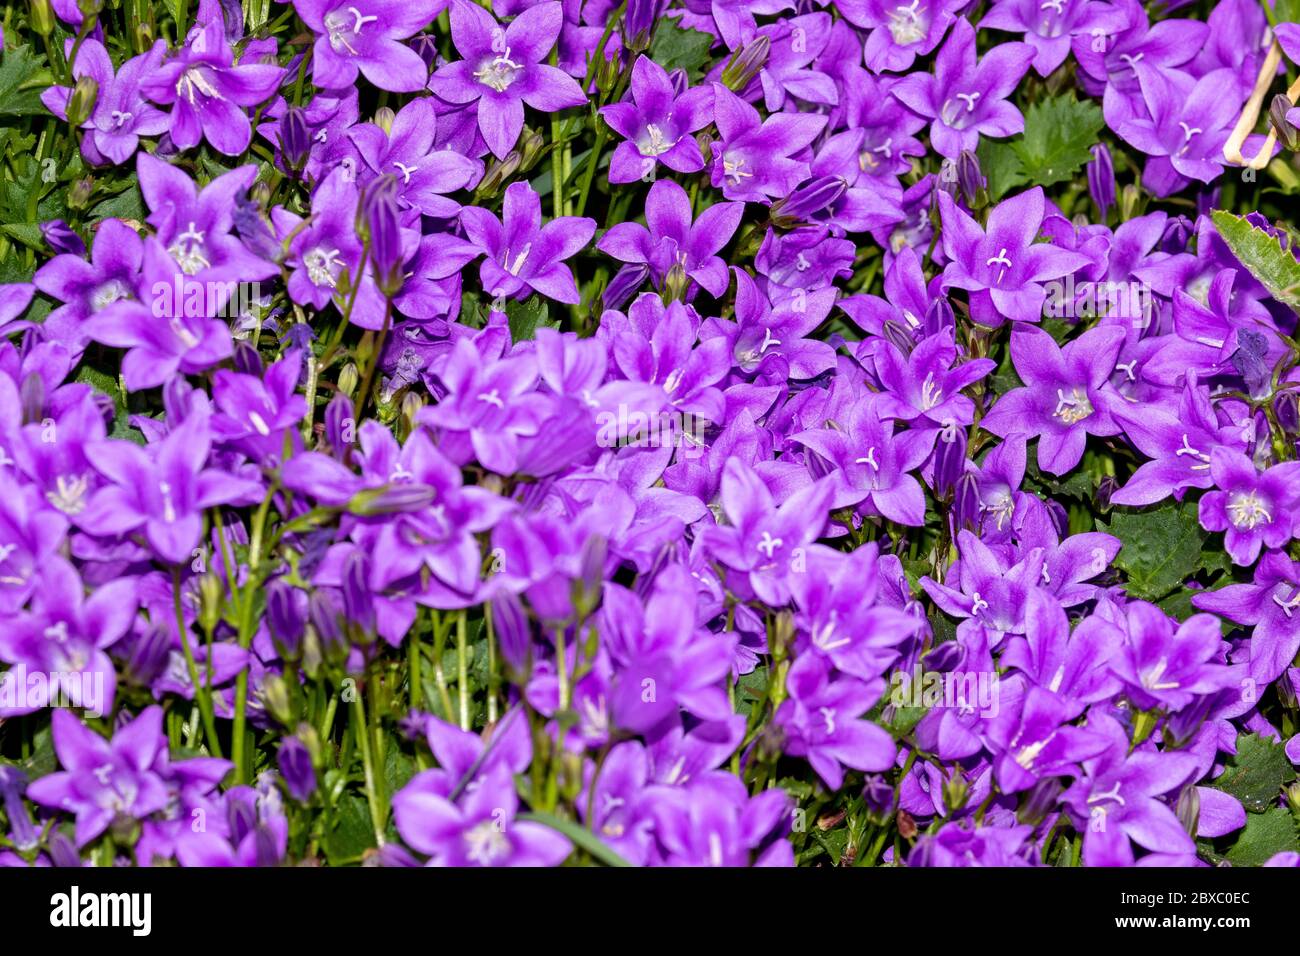 Campanula (bell flower) flowering profusely in the sunshine of an English garden Stock Photo